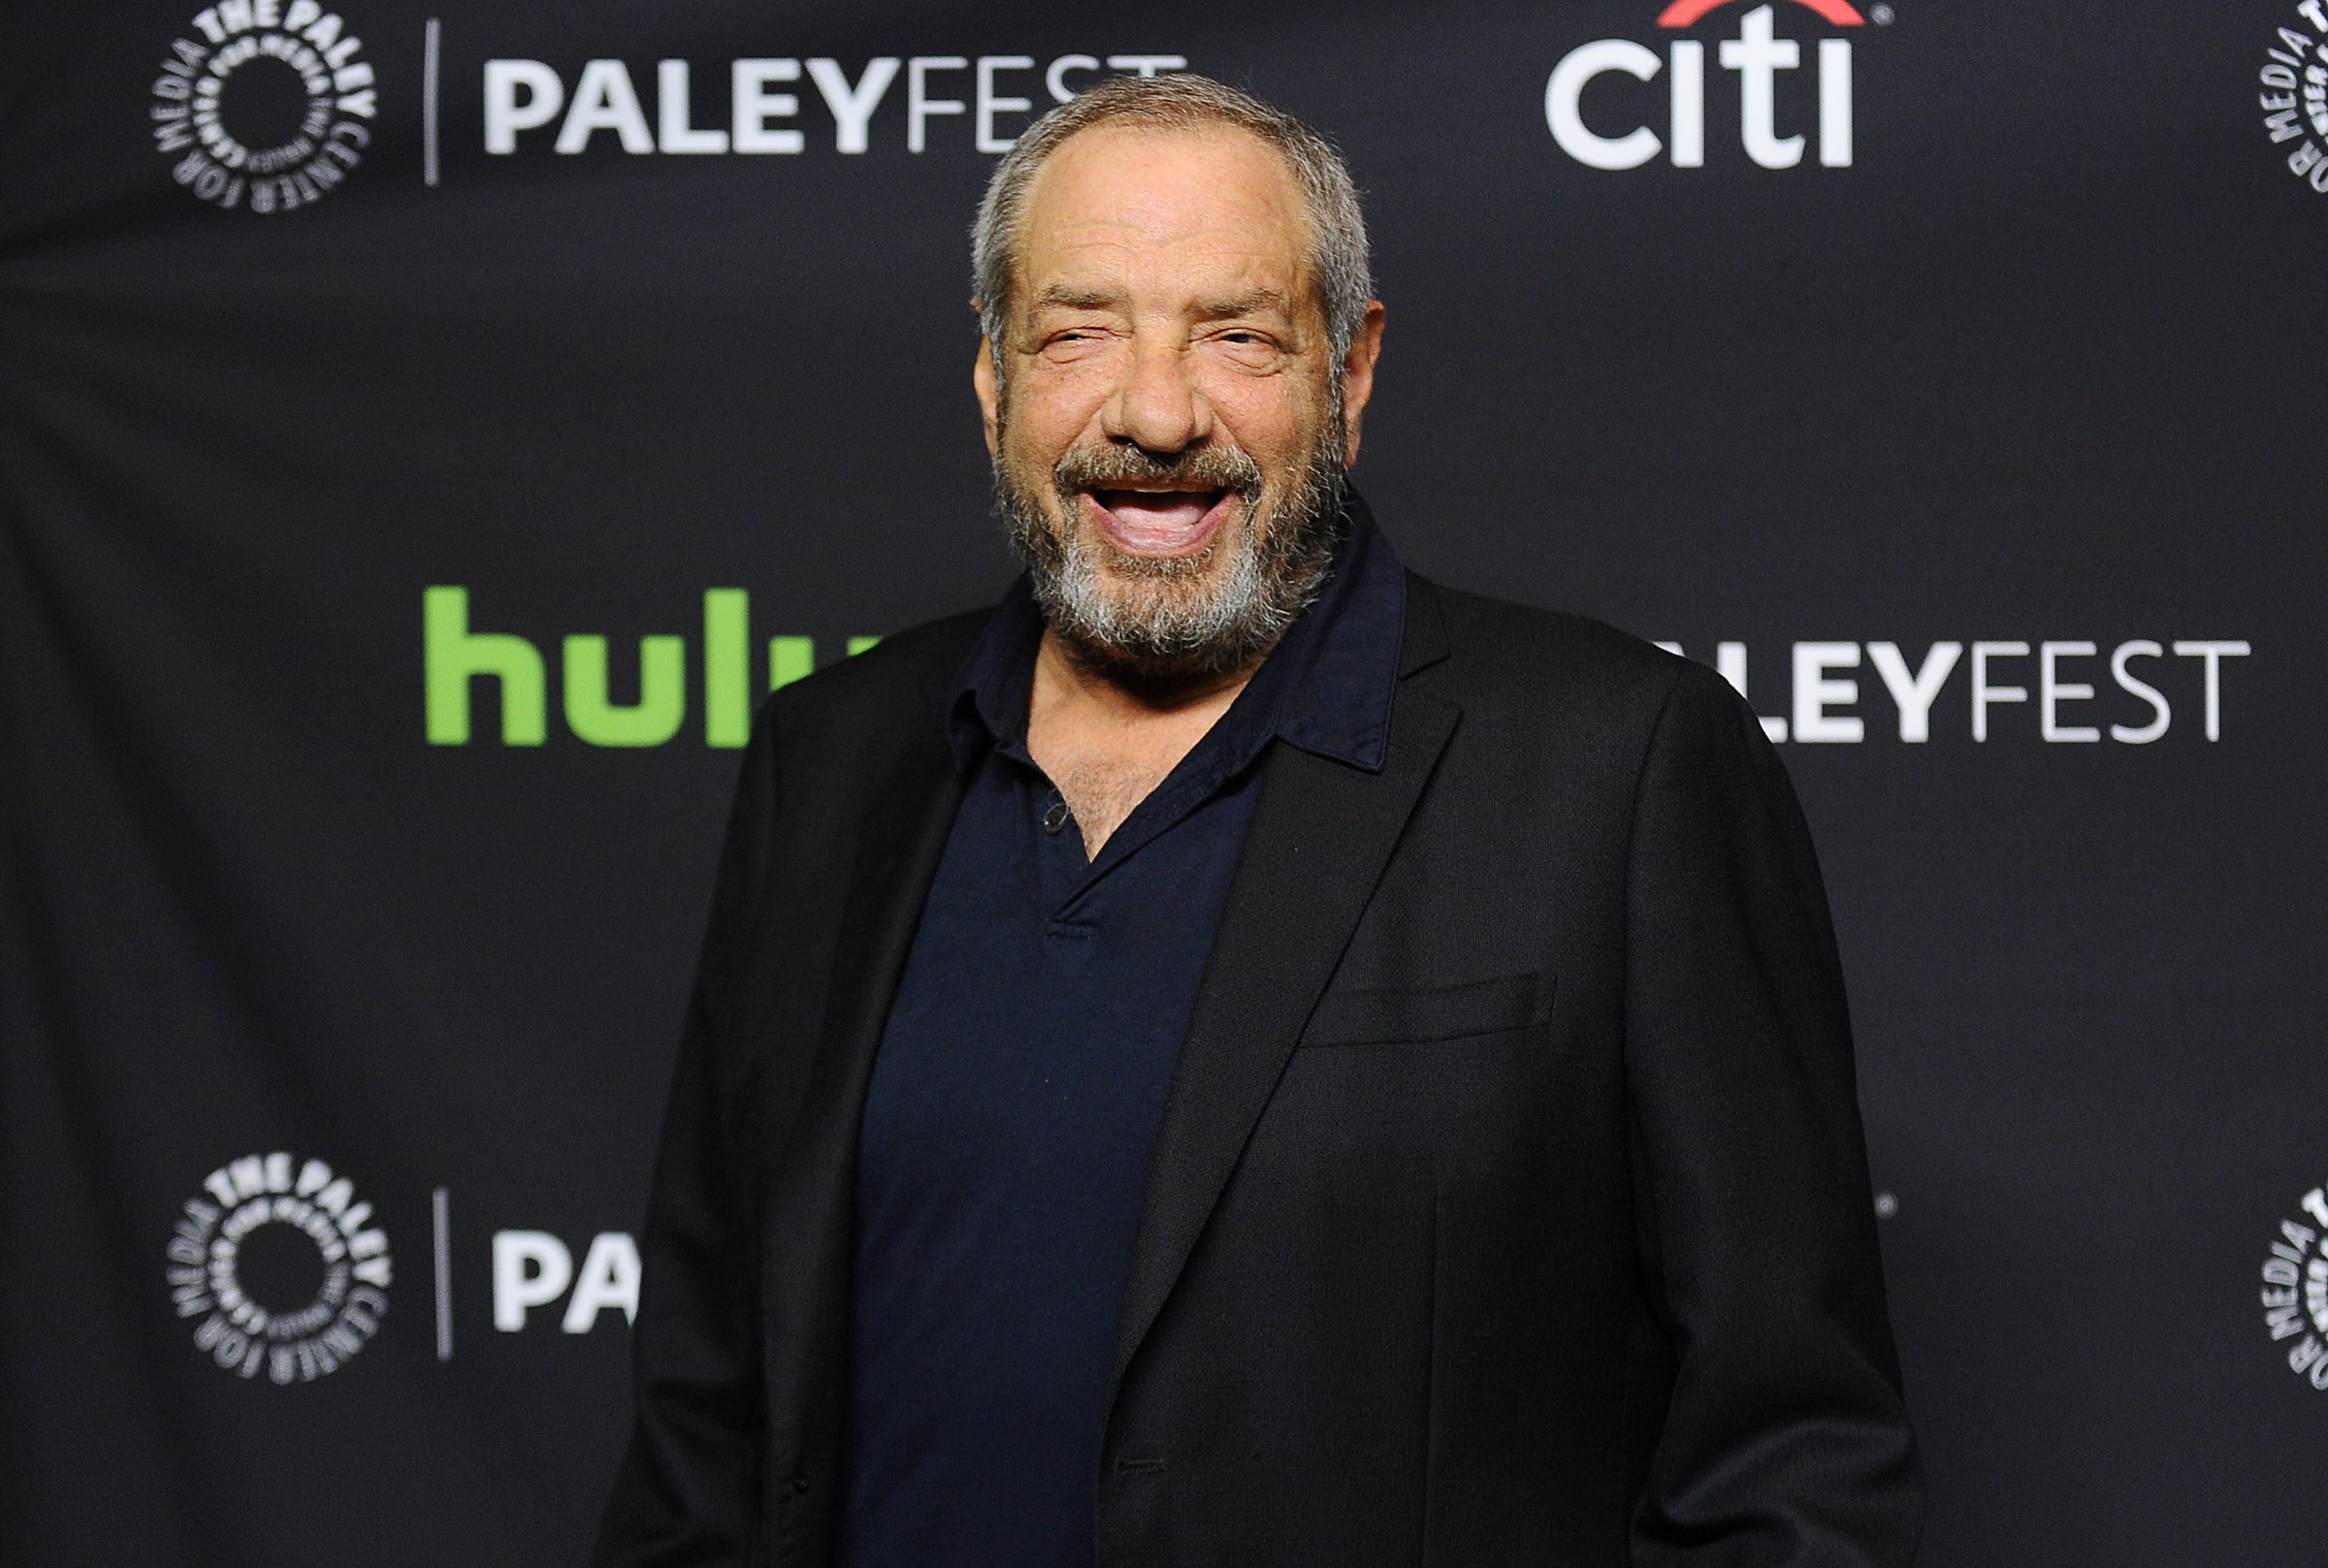 The Paley Center For Media's 33rd Annual PaleyFest Los Angeles - Stars Of "Law And Order: SVU", "Chicago Fire", "Chicago P.D.", And "Med" Salute Dick Wolf - Arrivals